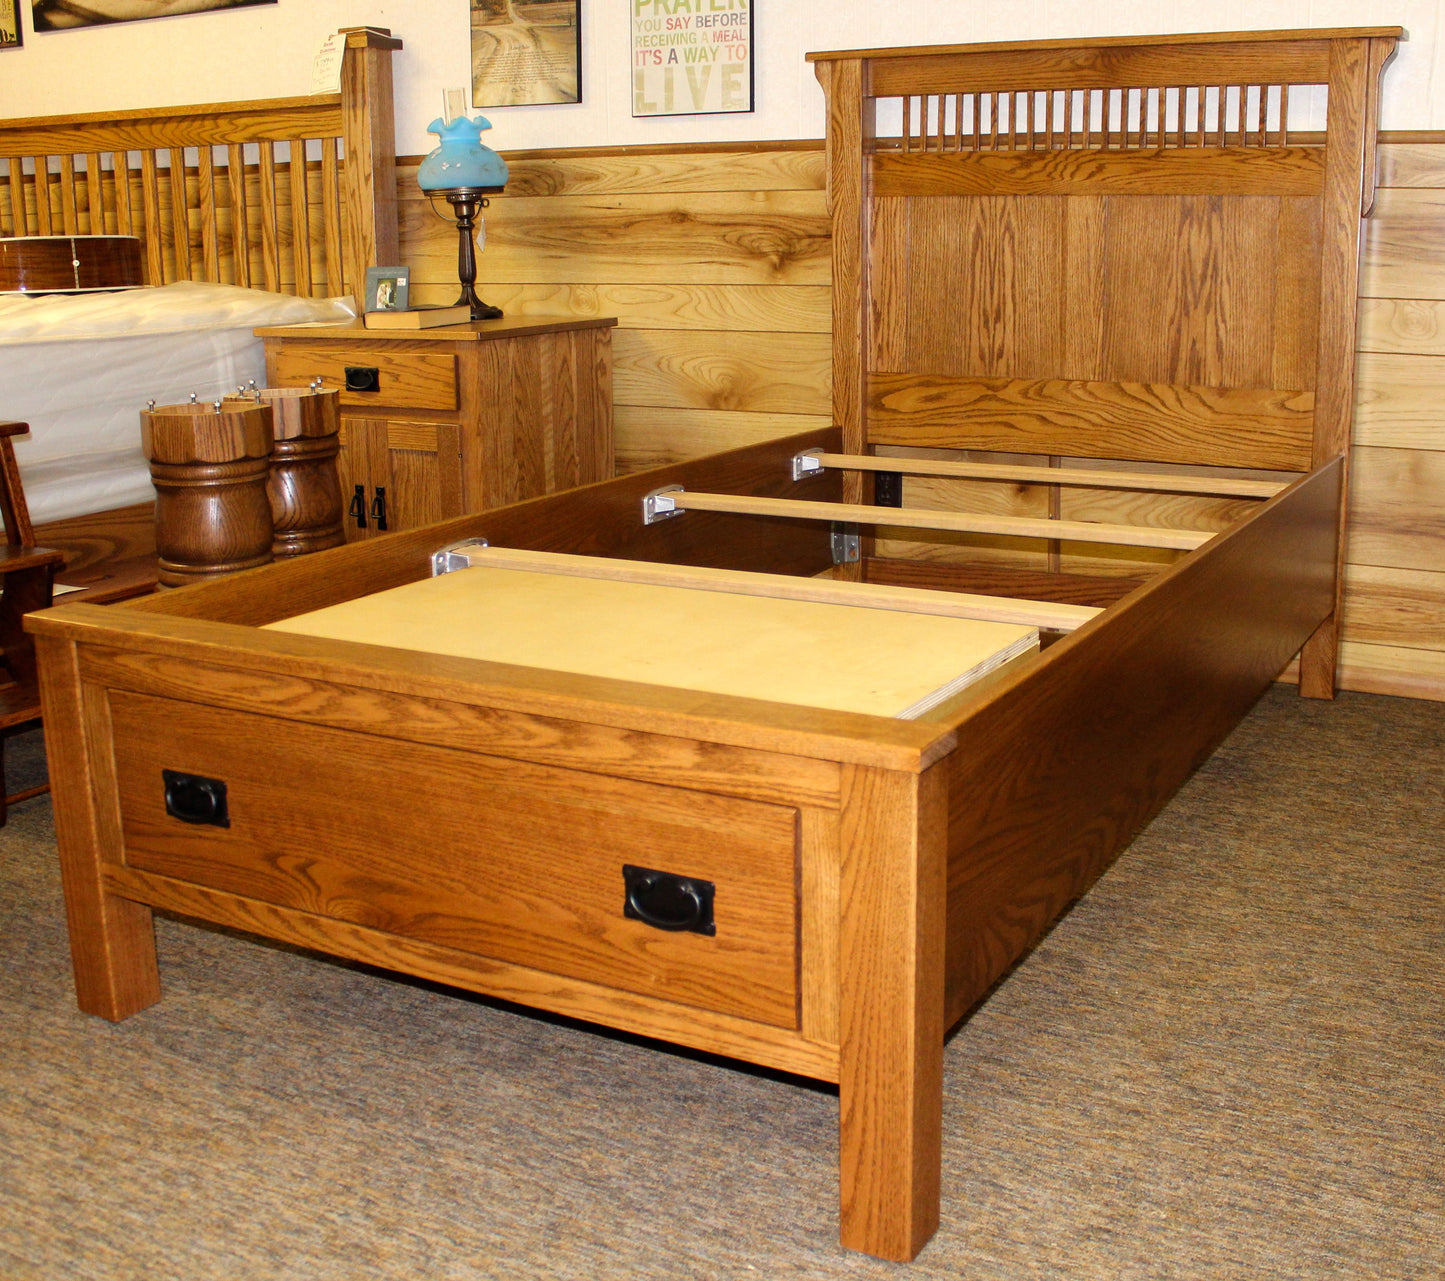 Deluxe Mission 1 Drawer Captain's Bed